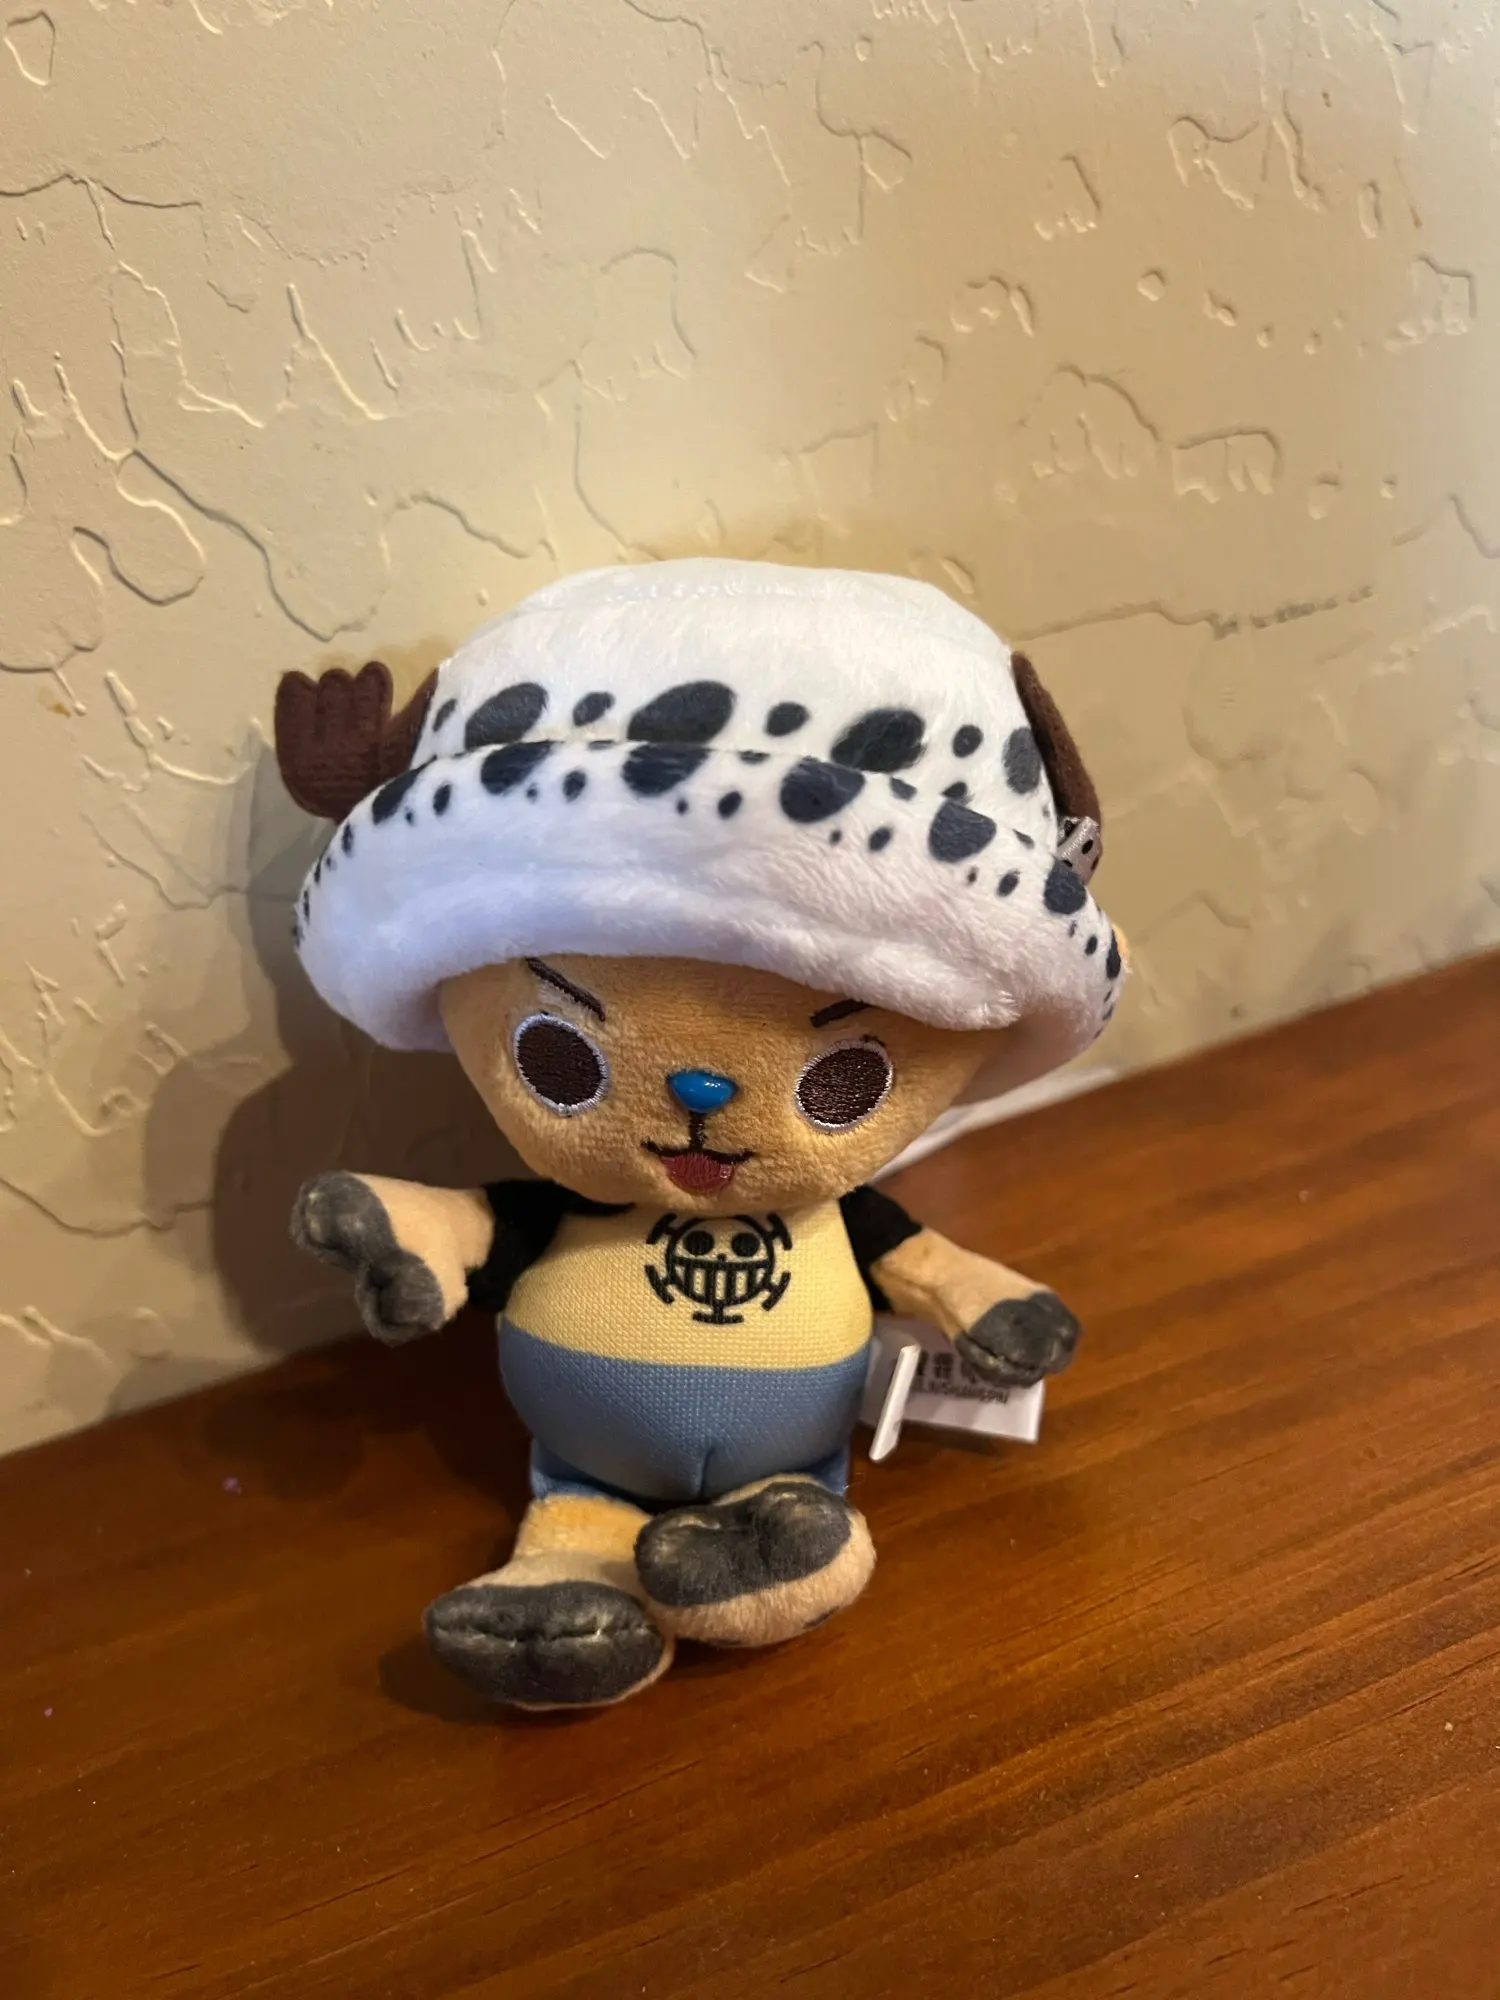 ONE PIECE Plush Keychain Characters 3.9" photo review